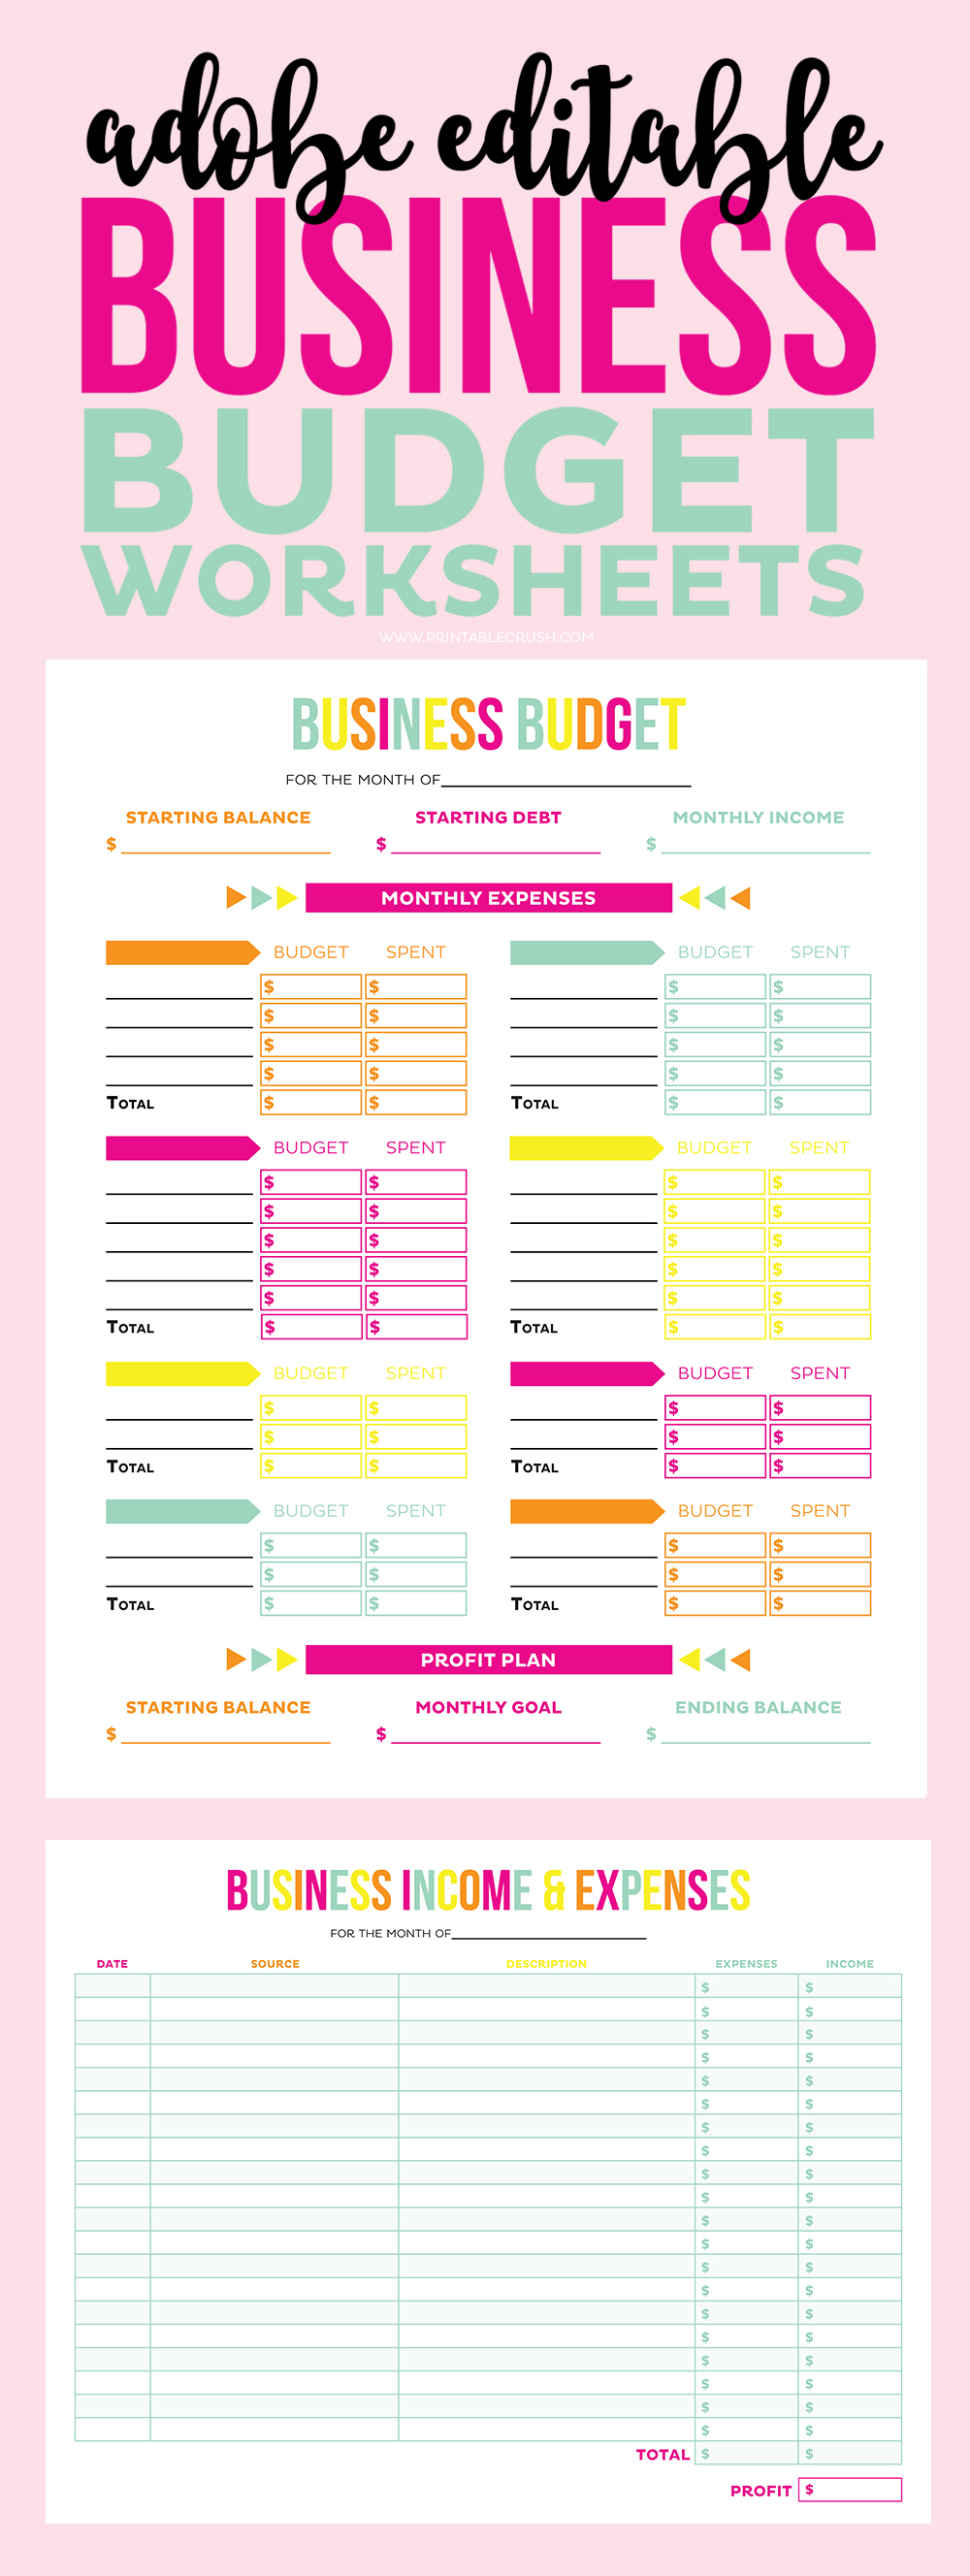 Make tax time a little less confusing with these Editable Printable Business Budge Worksheets! Includes expense and income track sheet, budget sheet, and a bonus password tracker for your online business accounts!